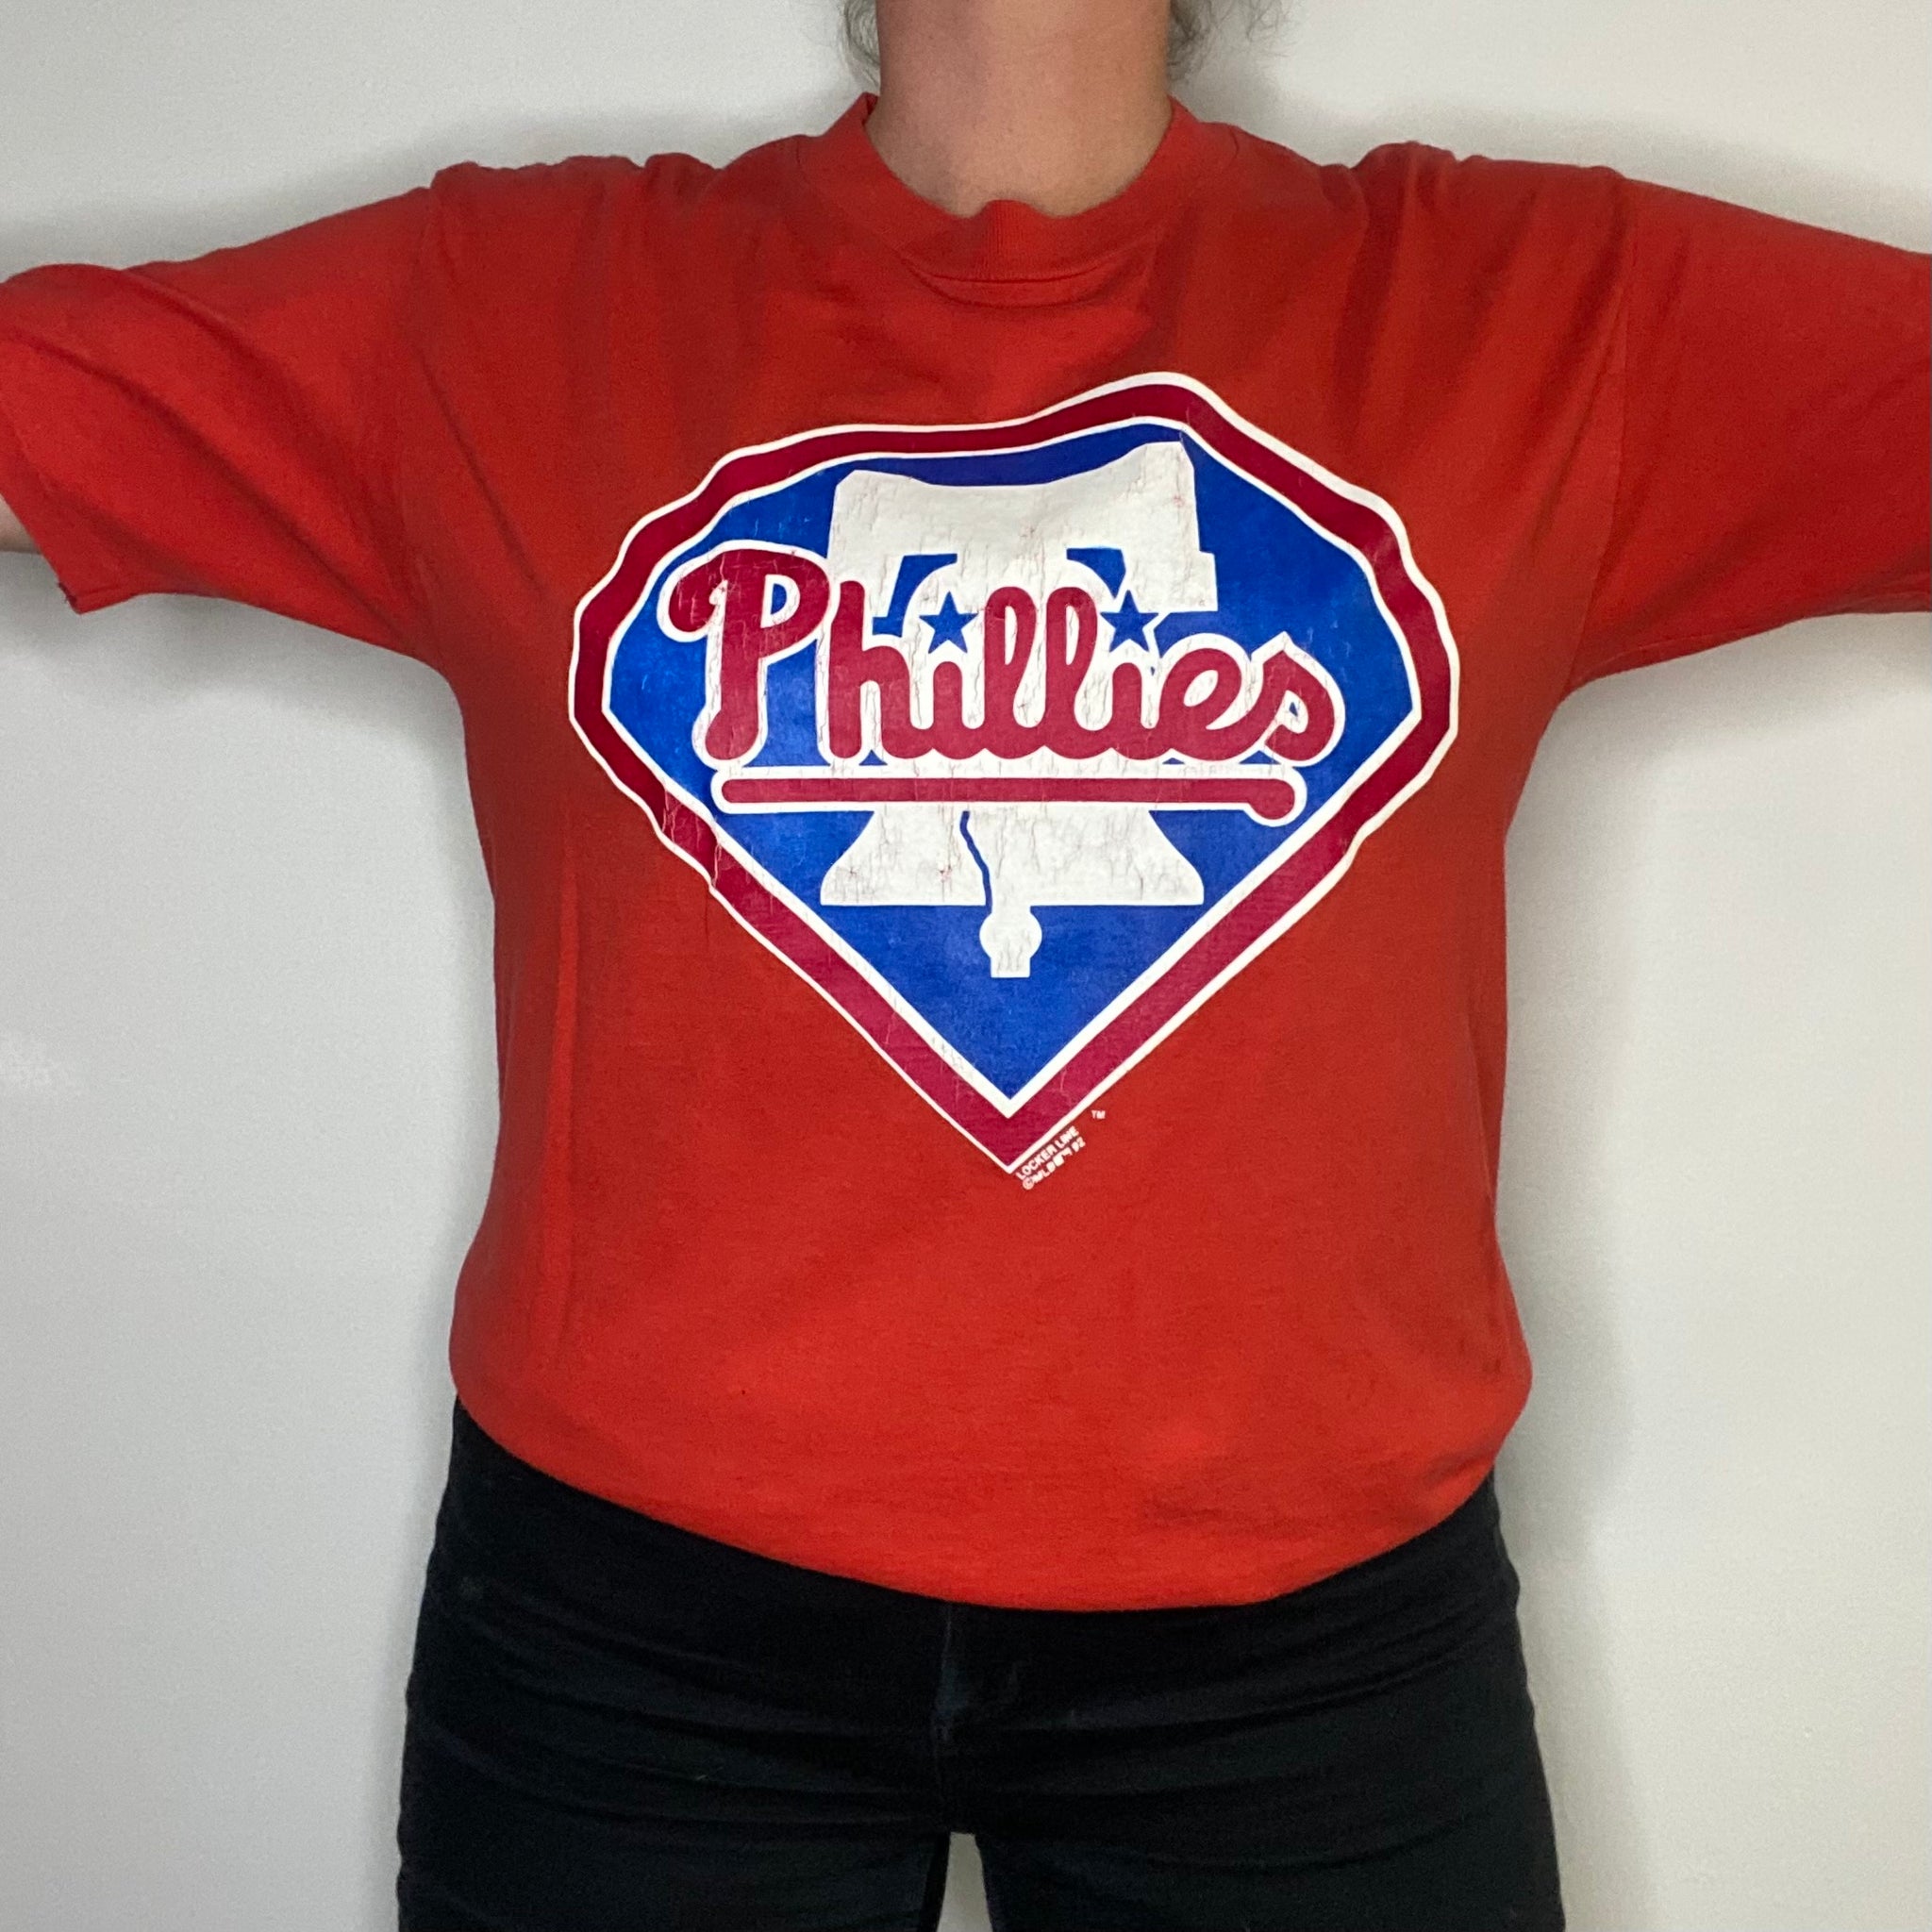 Youth XL Philadelphia Phillies blank jersey - Red